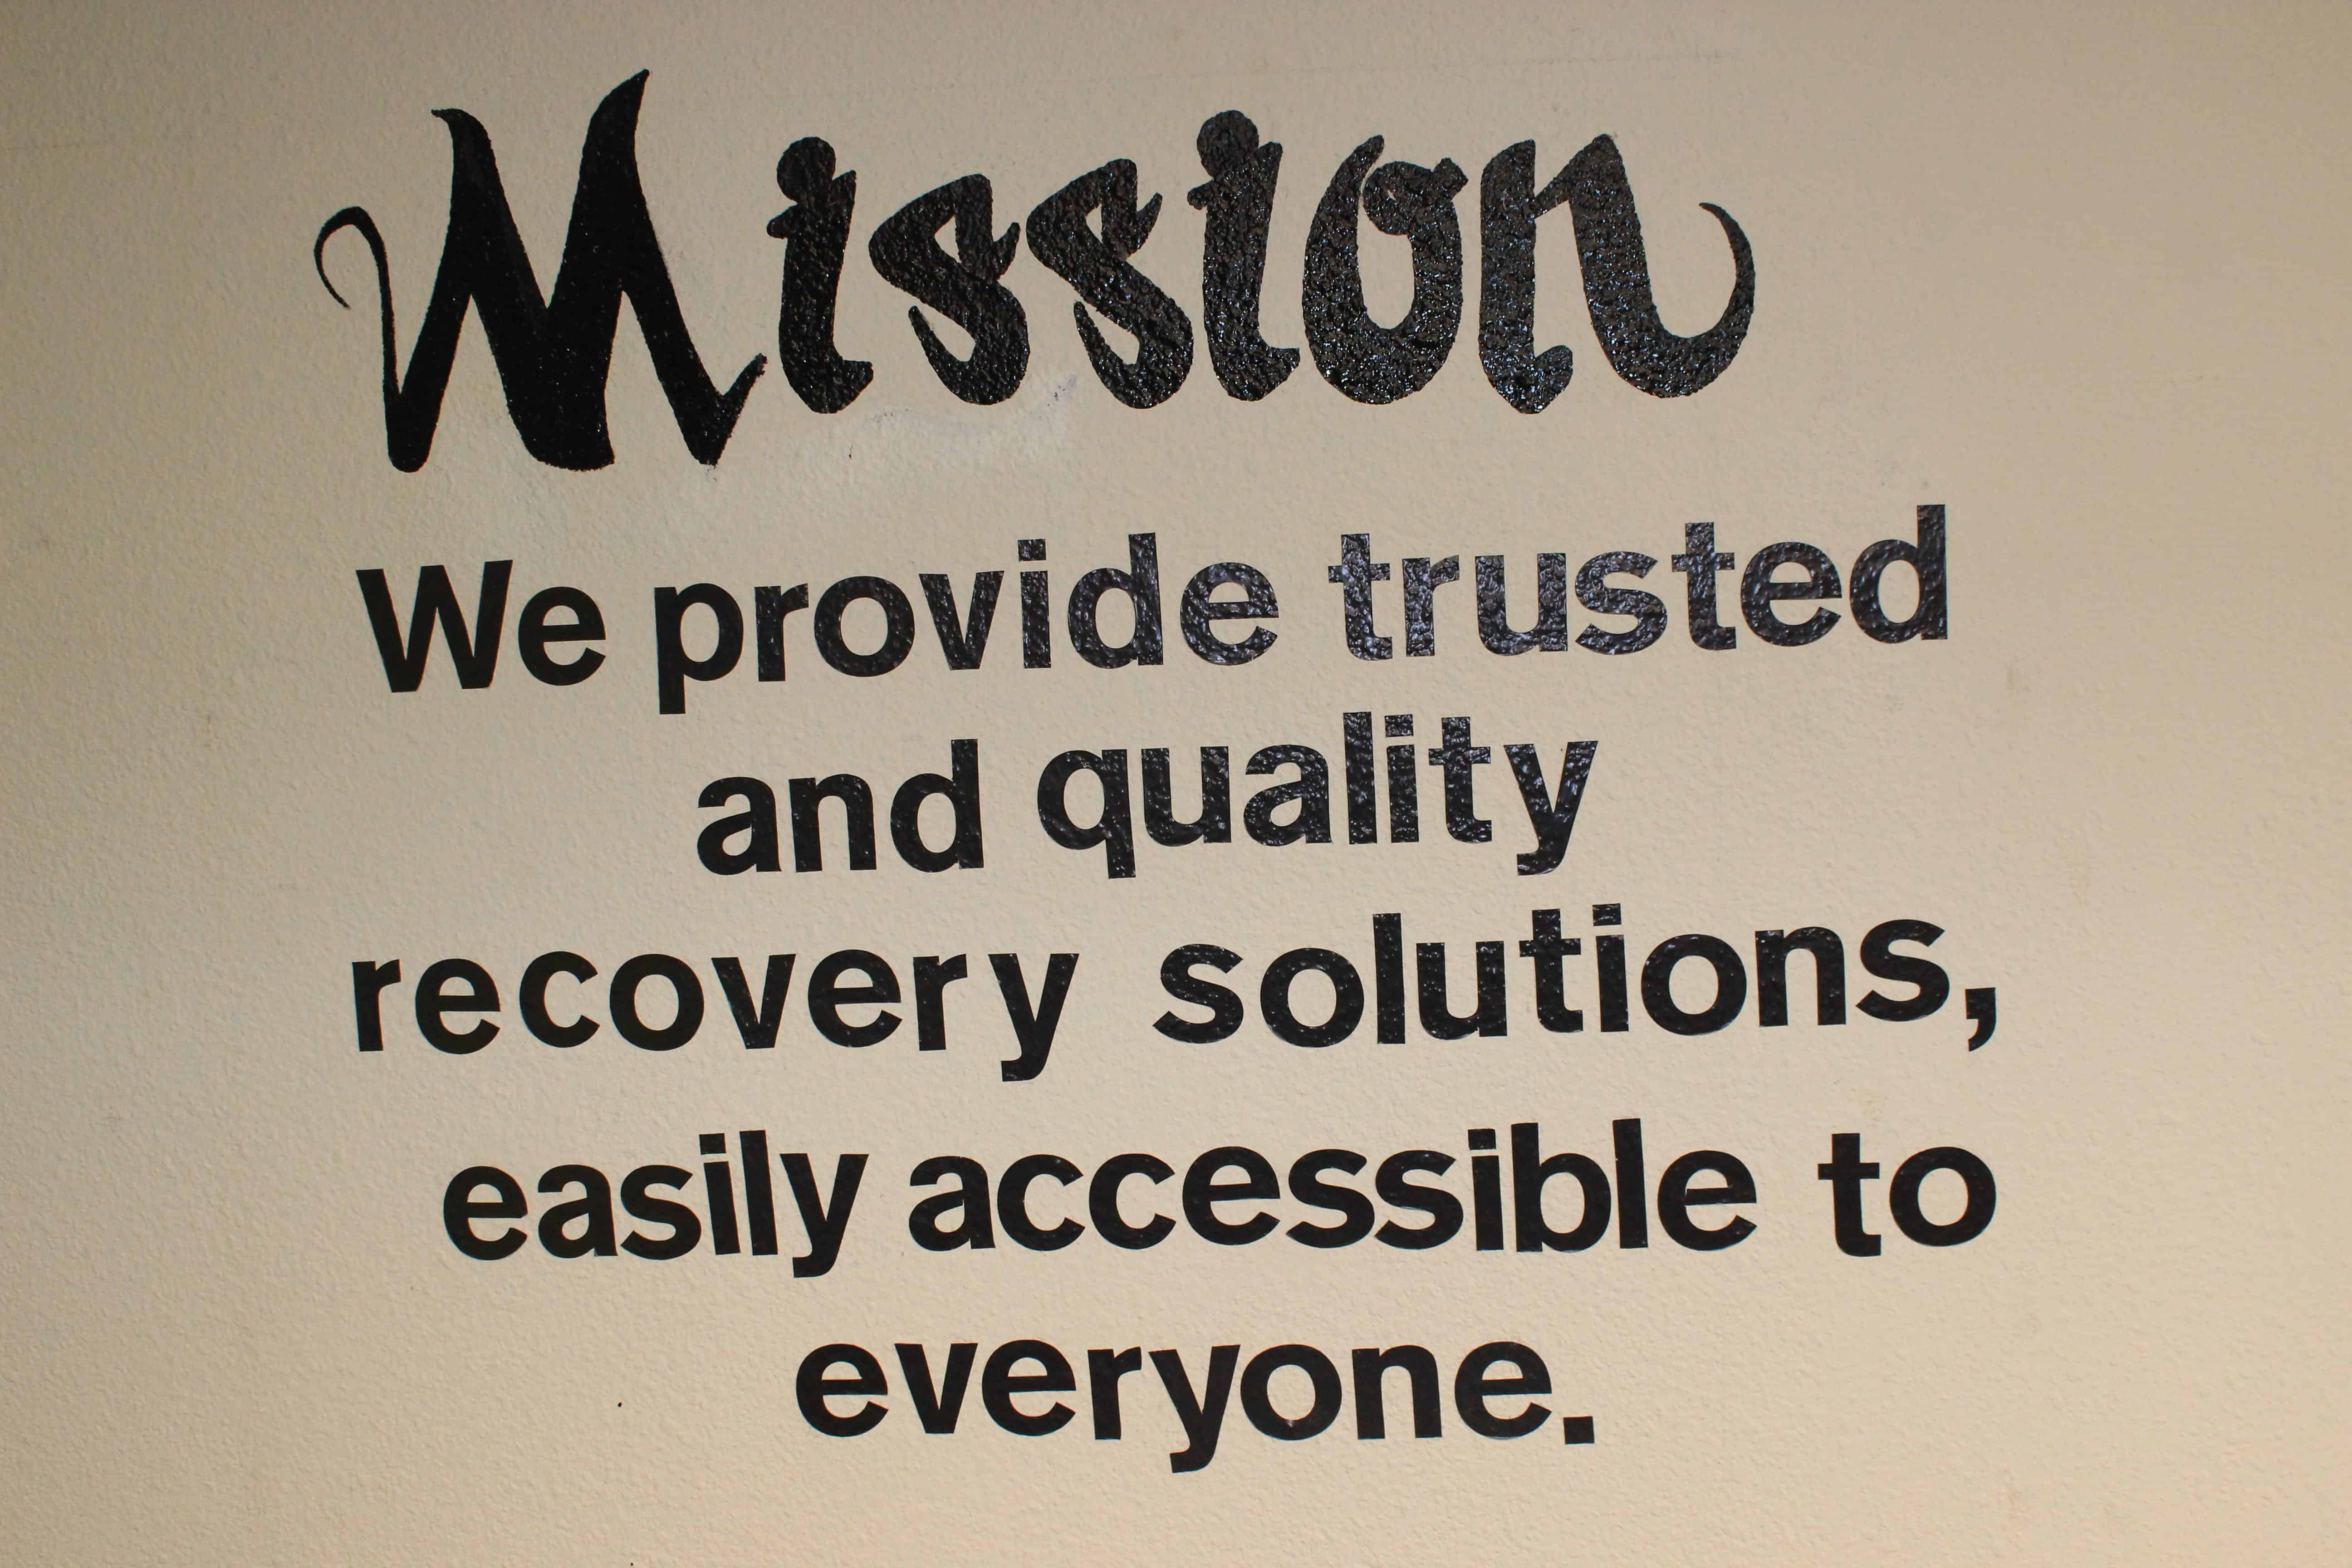 We provide trusted, quality recovery solutions easily accessible to everyone.